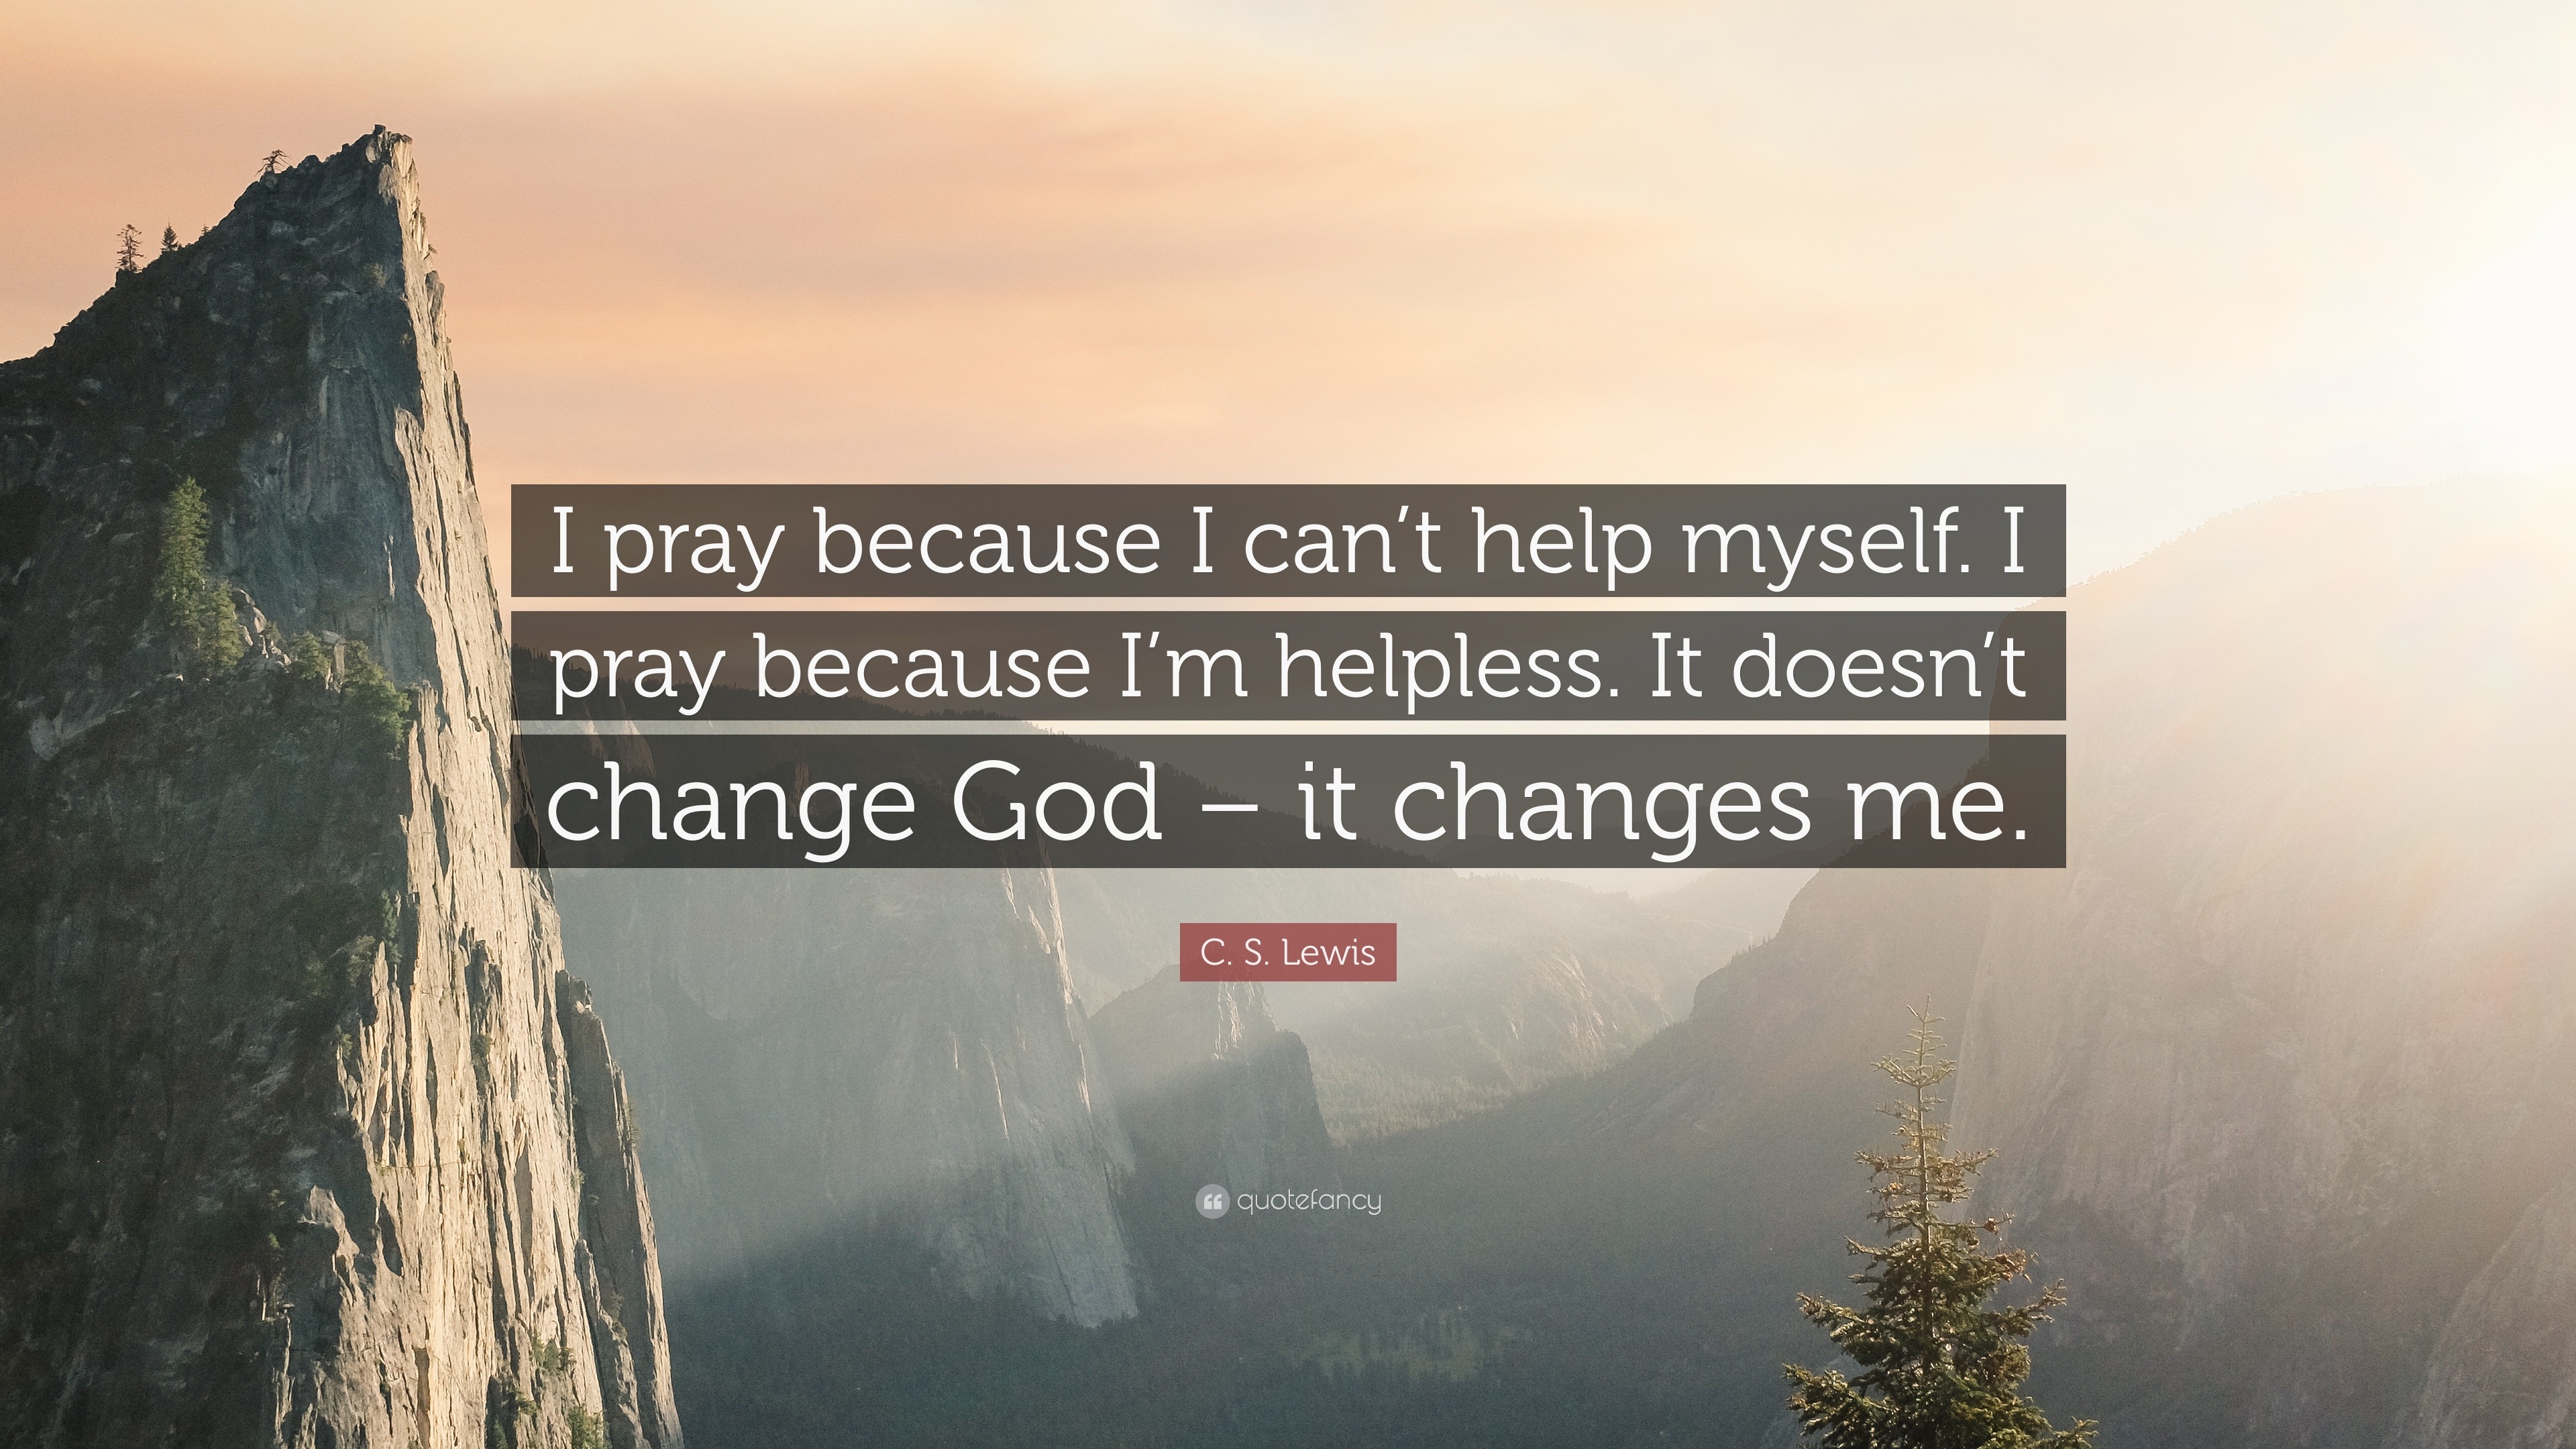 C. S. Lewis Quote: “I pray because I can’t help myself. I pray because